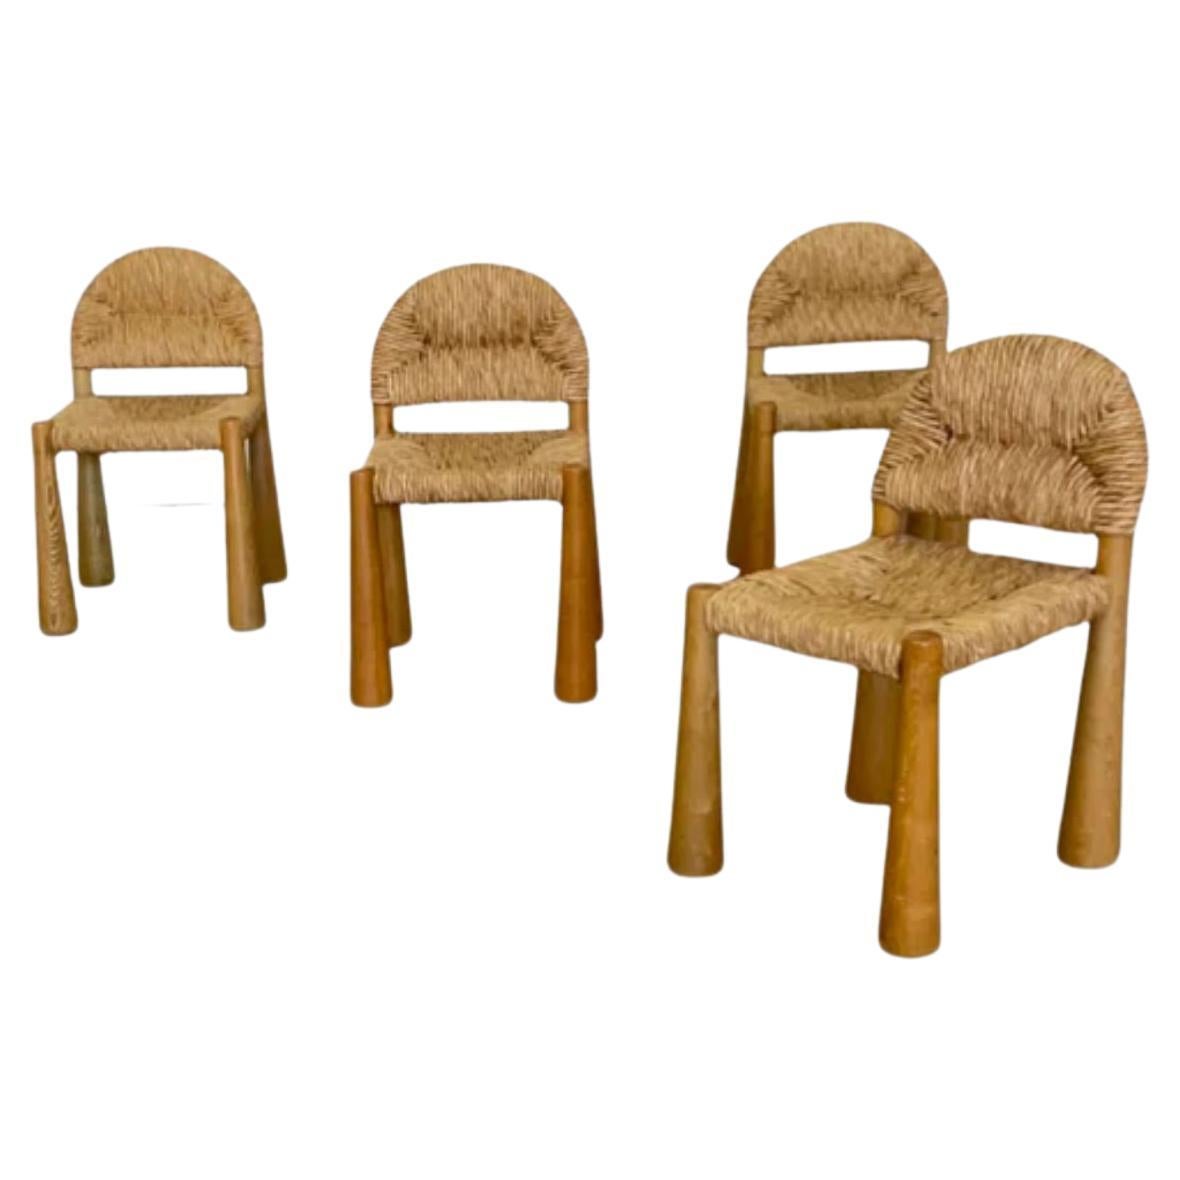 Set of 4 "Toscanolla" Dining Chairs in Solid Pine by Alessandro Becchi, 1970s